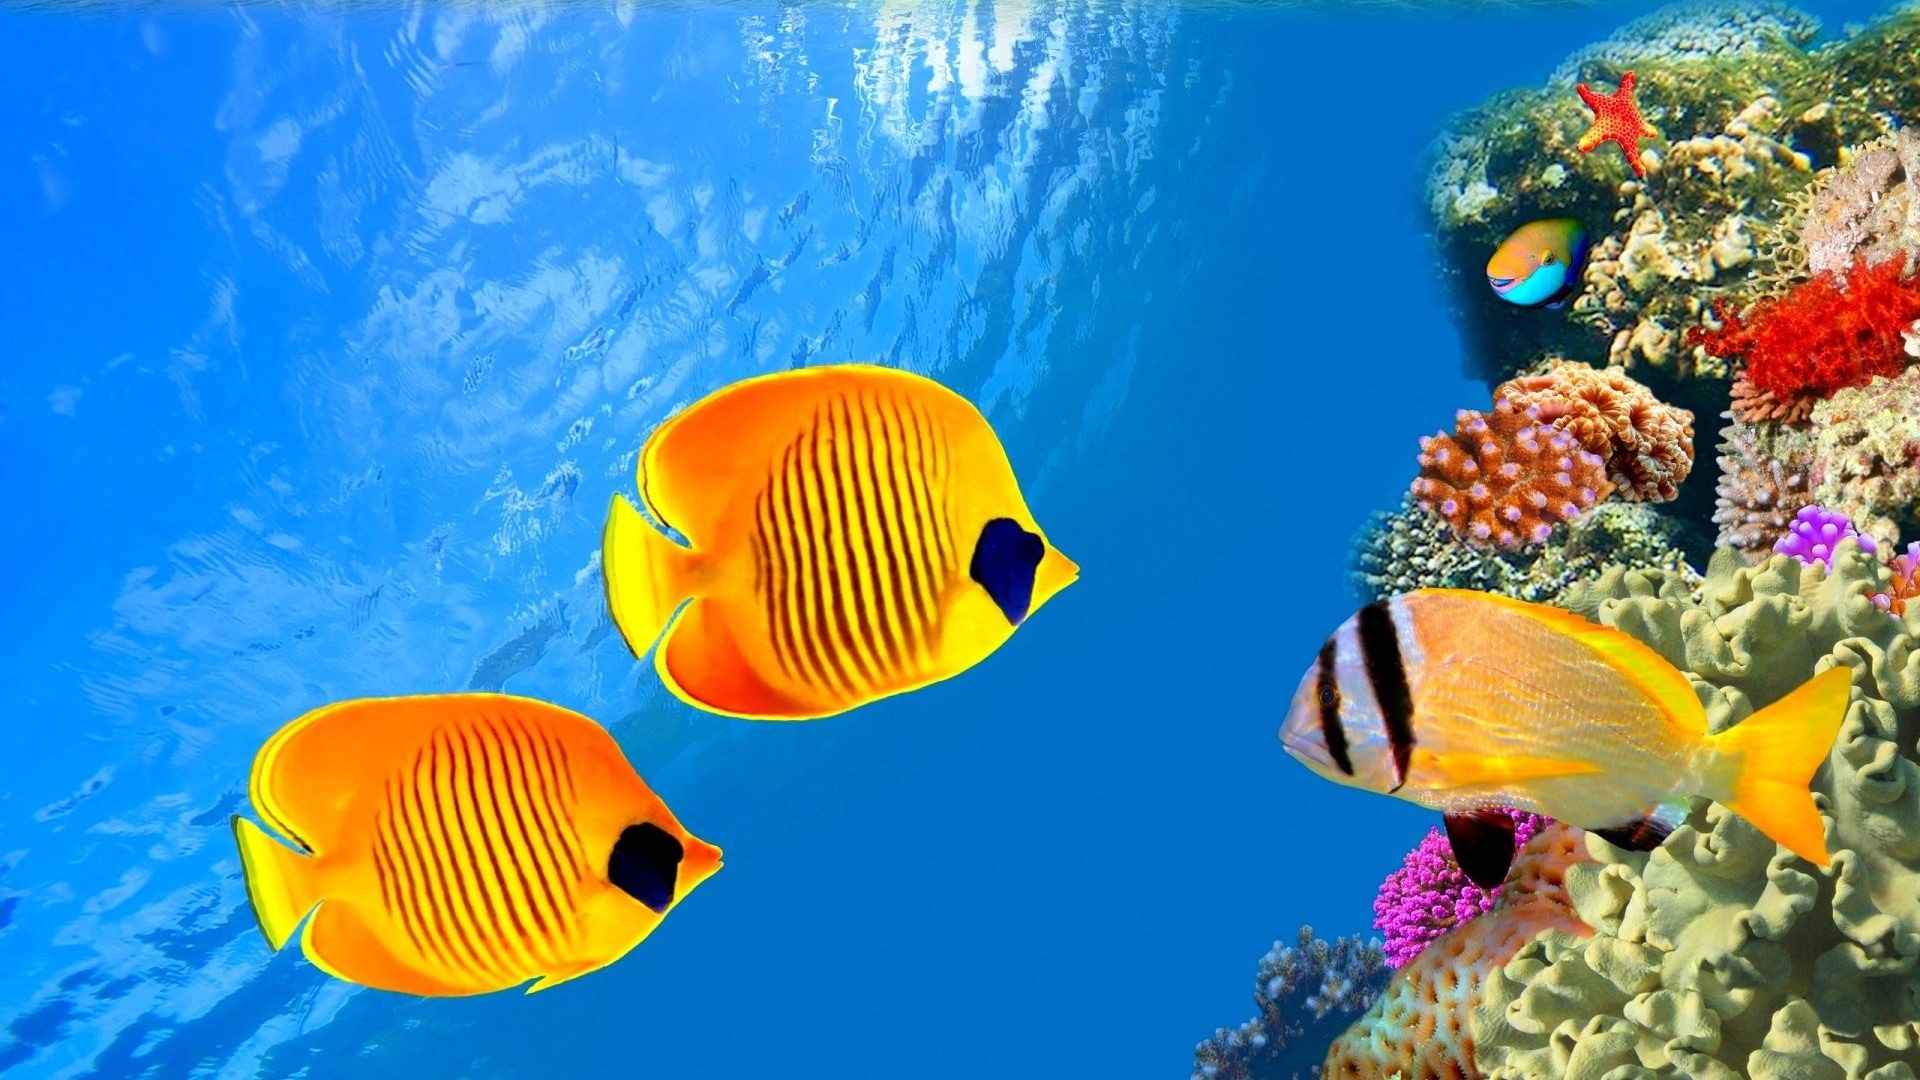 1920x1080 Underwater Tag - Nature Fish Sea Underwater Fishes Ocean Sealife Moving Hd  Wallpaper for HD 16